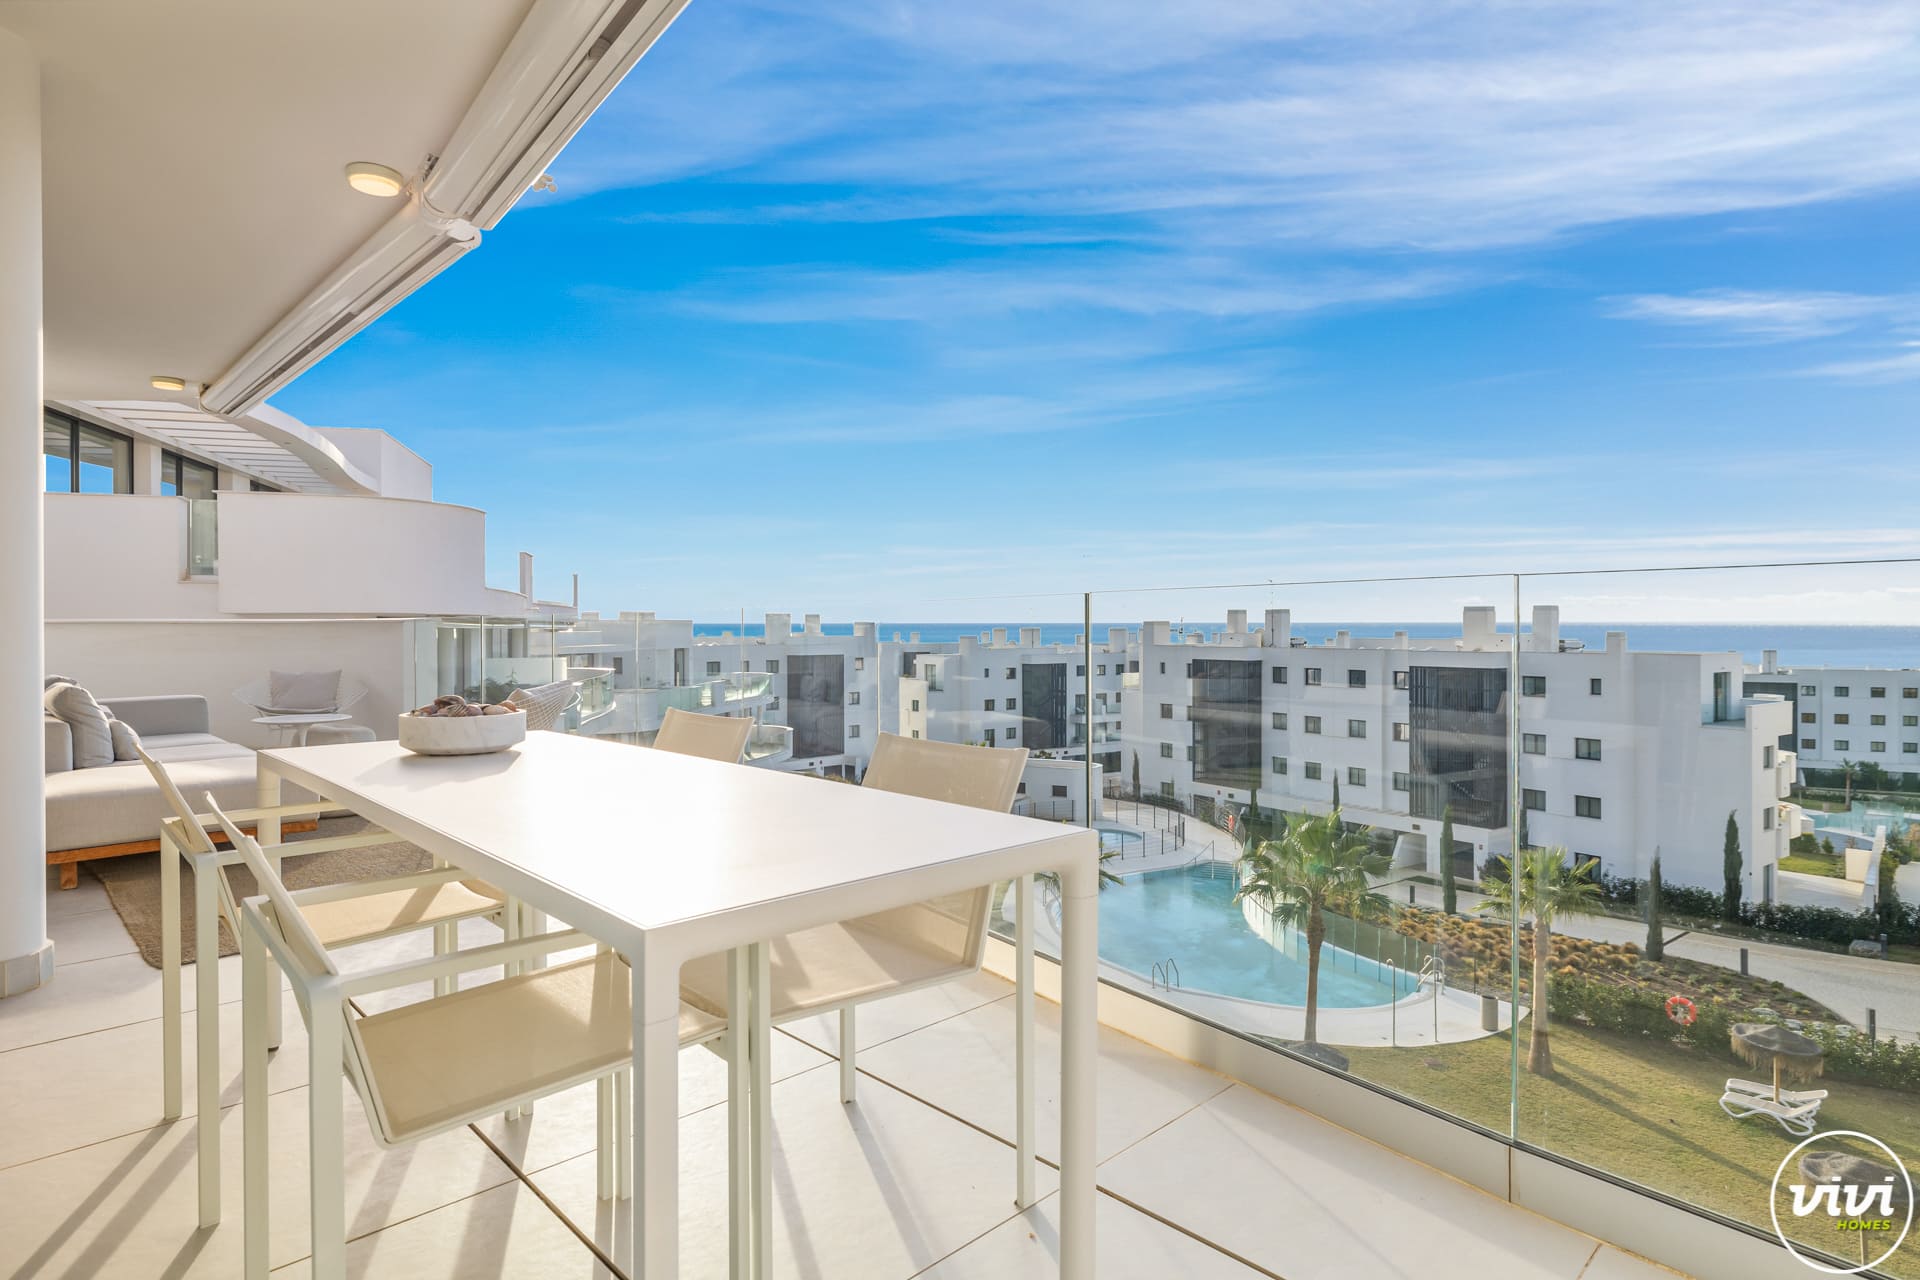 ViVi Real Estate: A modern middle floor apartment with a balcony overlooking the ocean.